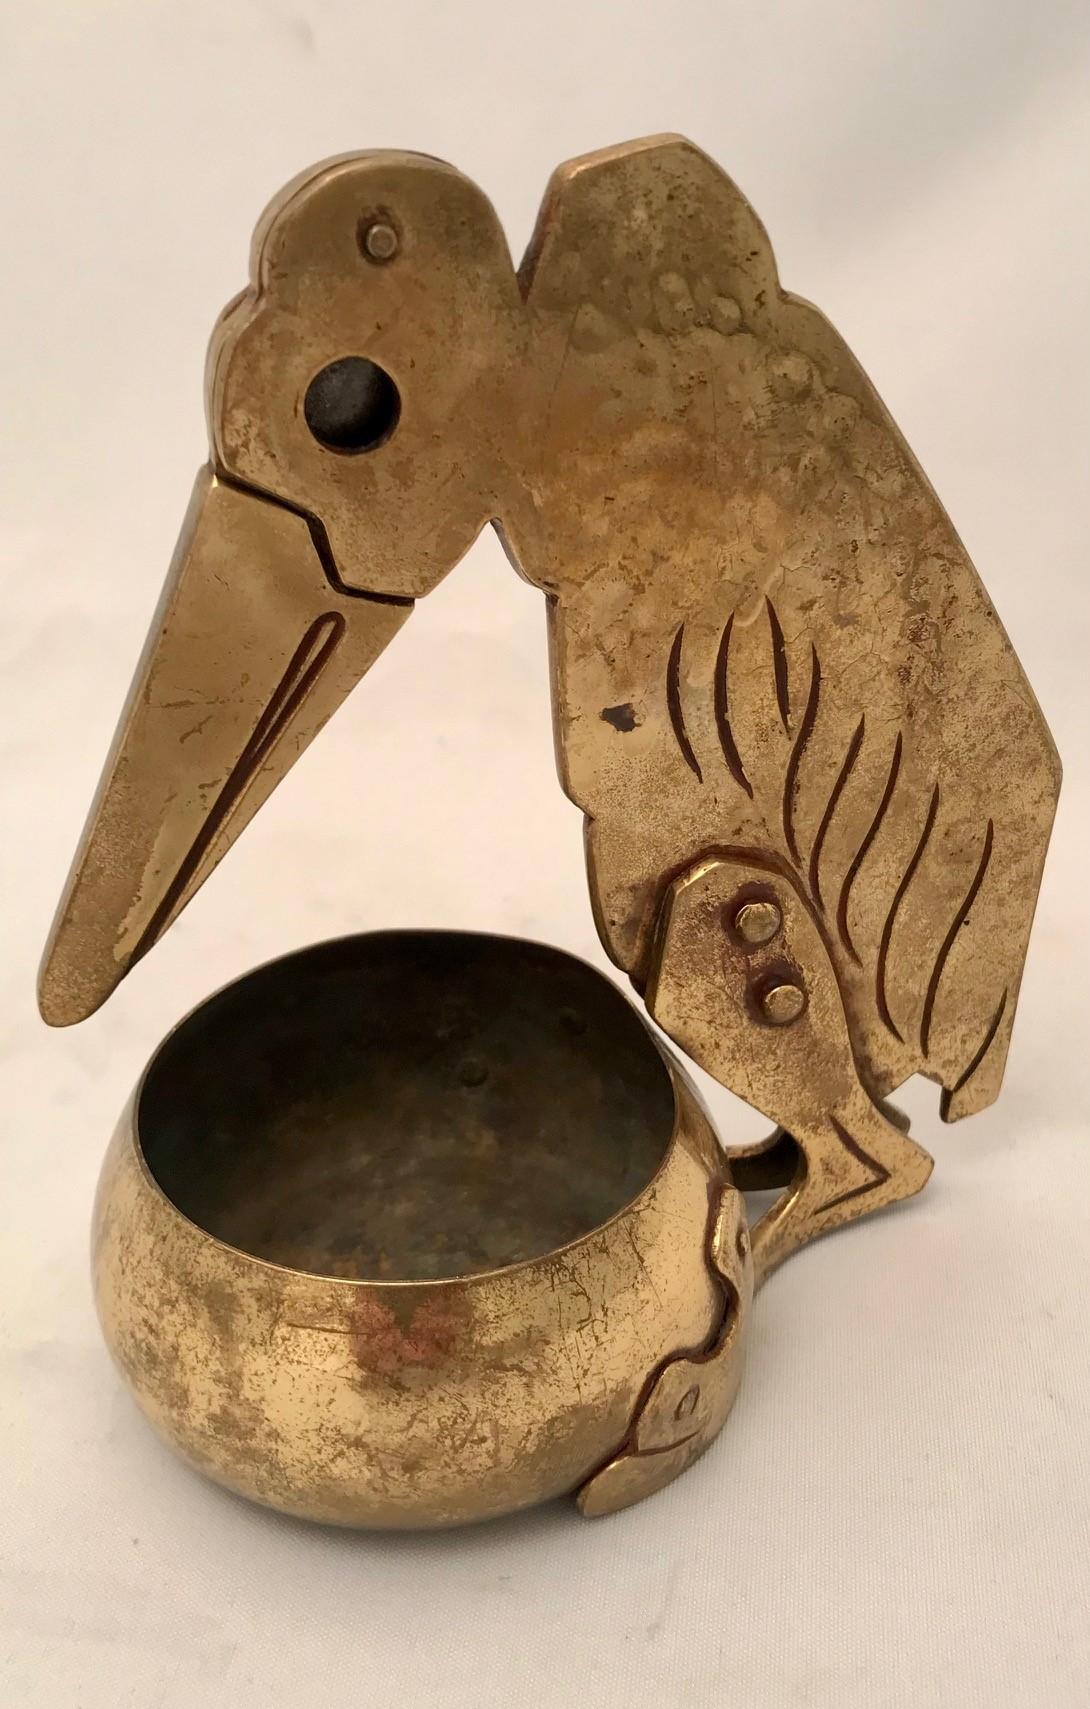 Figural cigar cutter with ash tray in the shape of a maribou, leaning over a bowl. The bird's-eye is the opening for the cigar and the beak is the knife. the stub falls into the bowl  brass, hand crafted around 1910. 